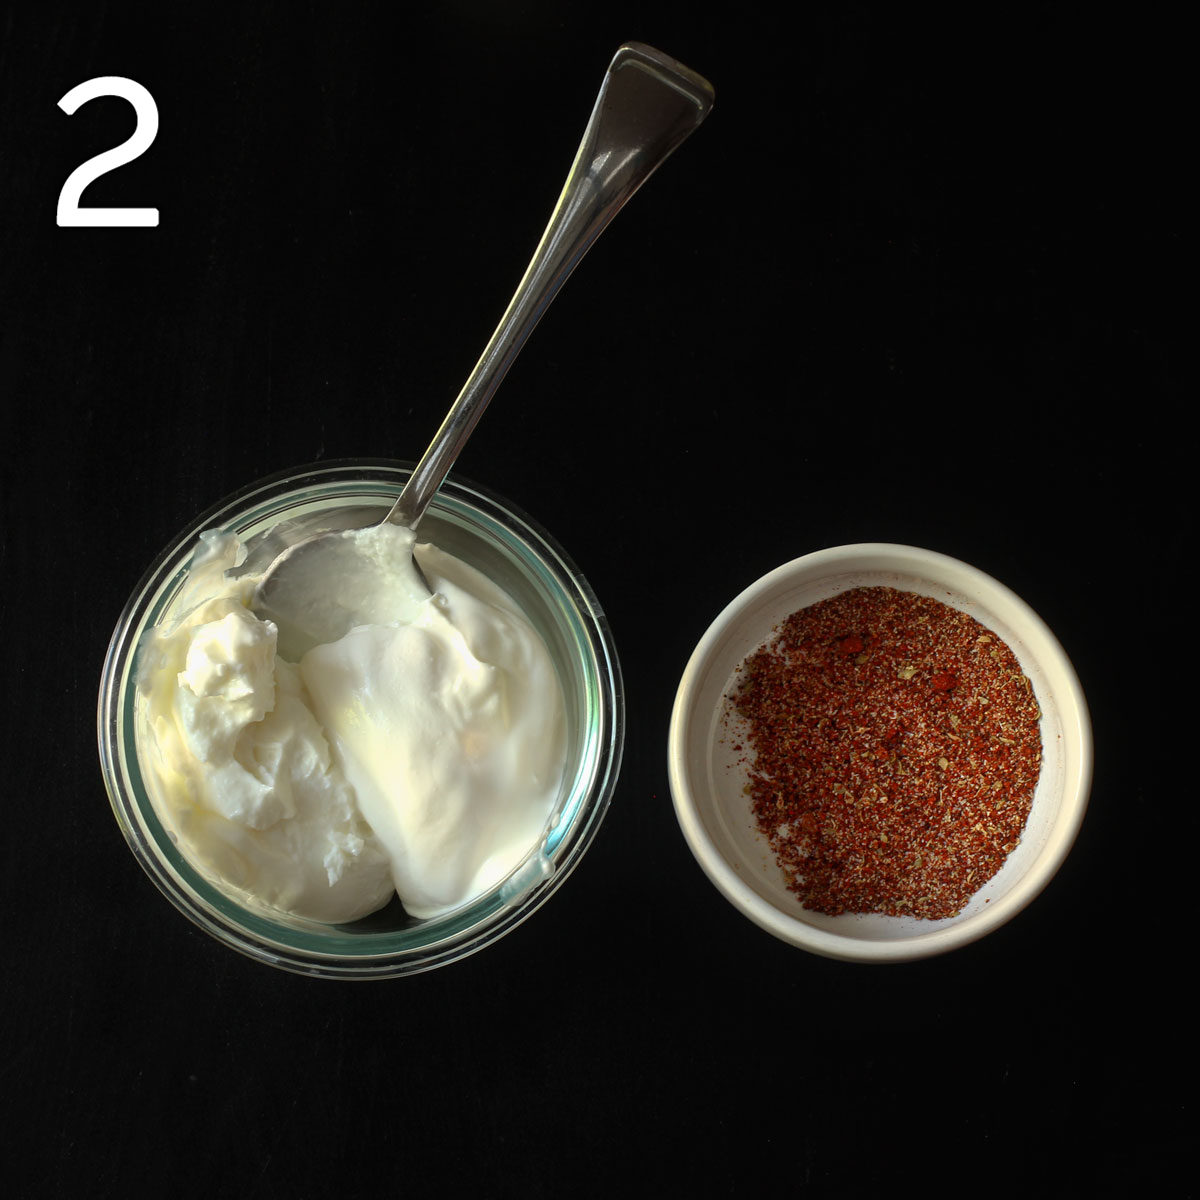 dish of sour cream with a spoon next to dish of taco seasoning.